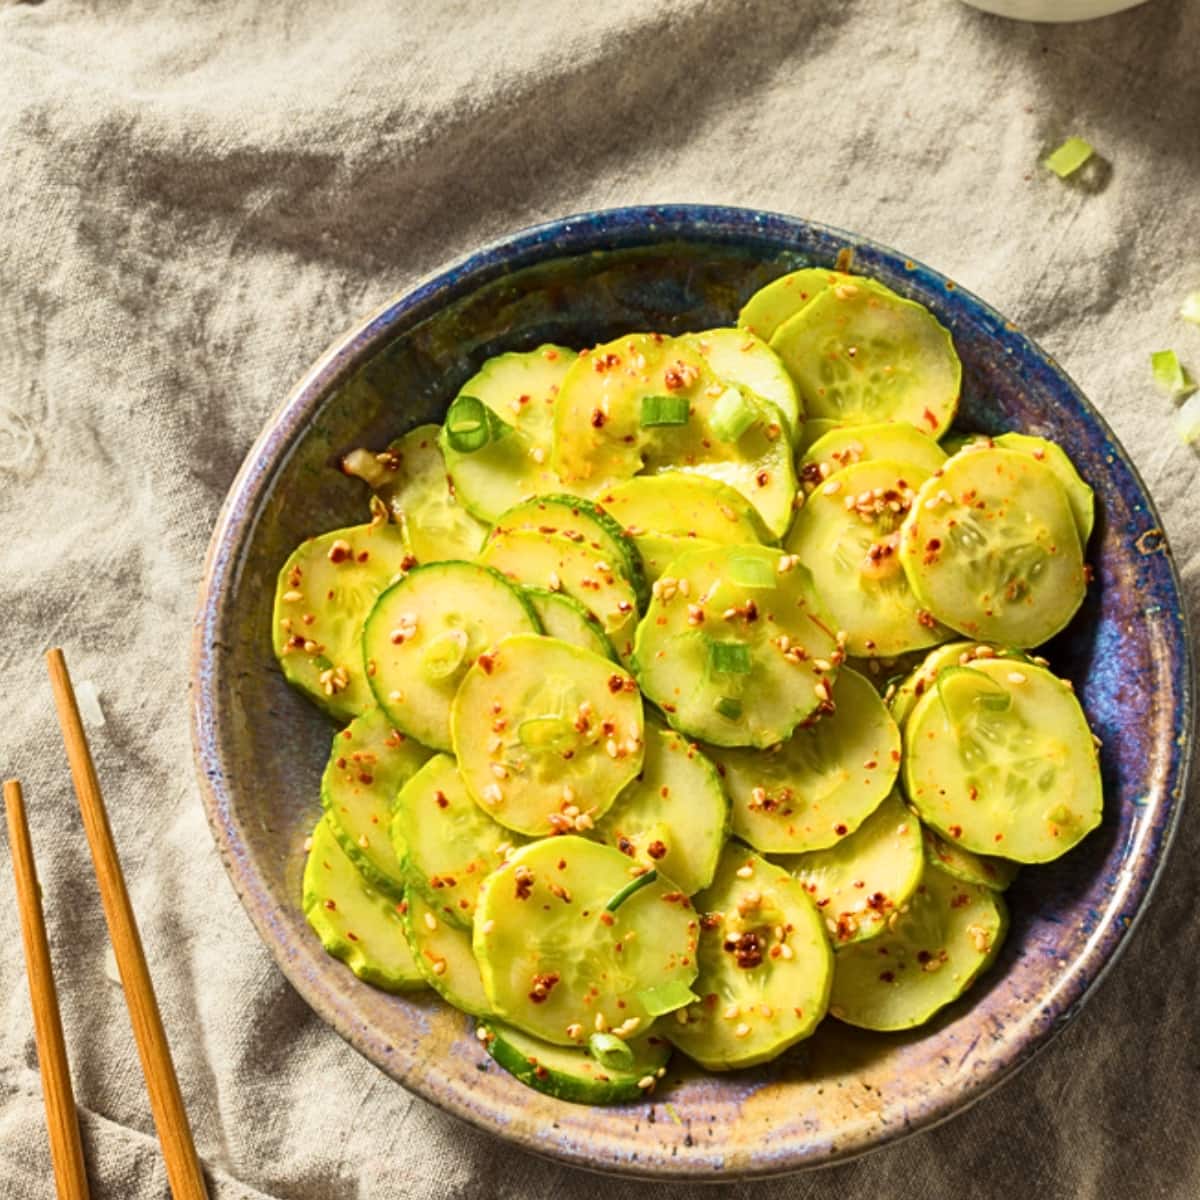 Top view of a bowl of Asian cucumber salad with chili flakes and scallions and a pair of chopsticks beside. 